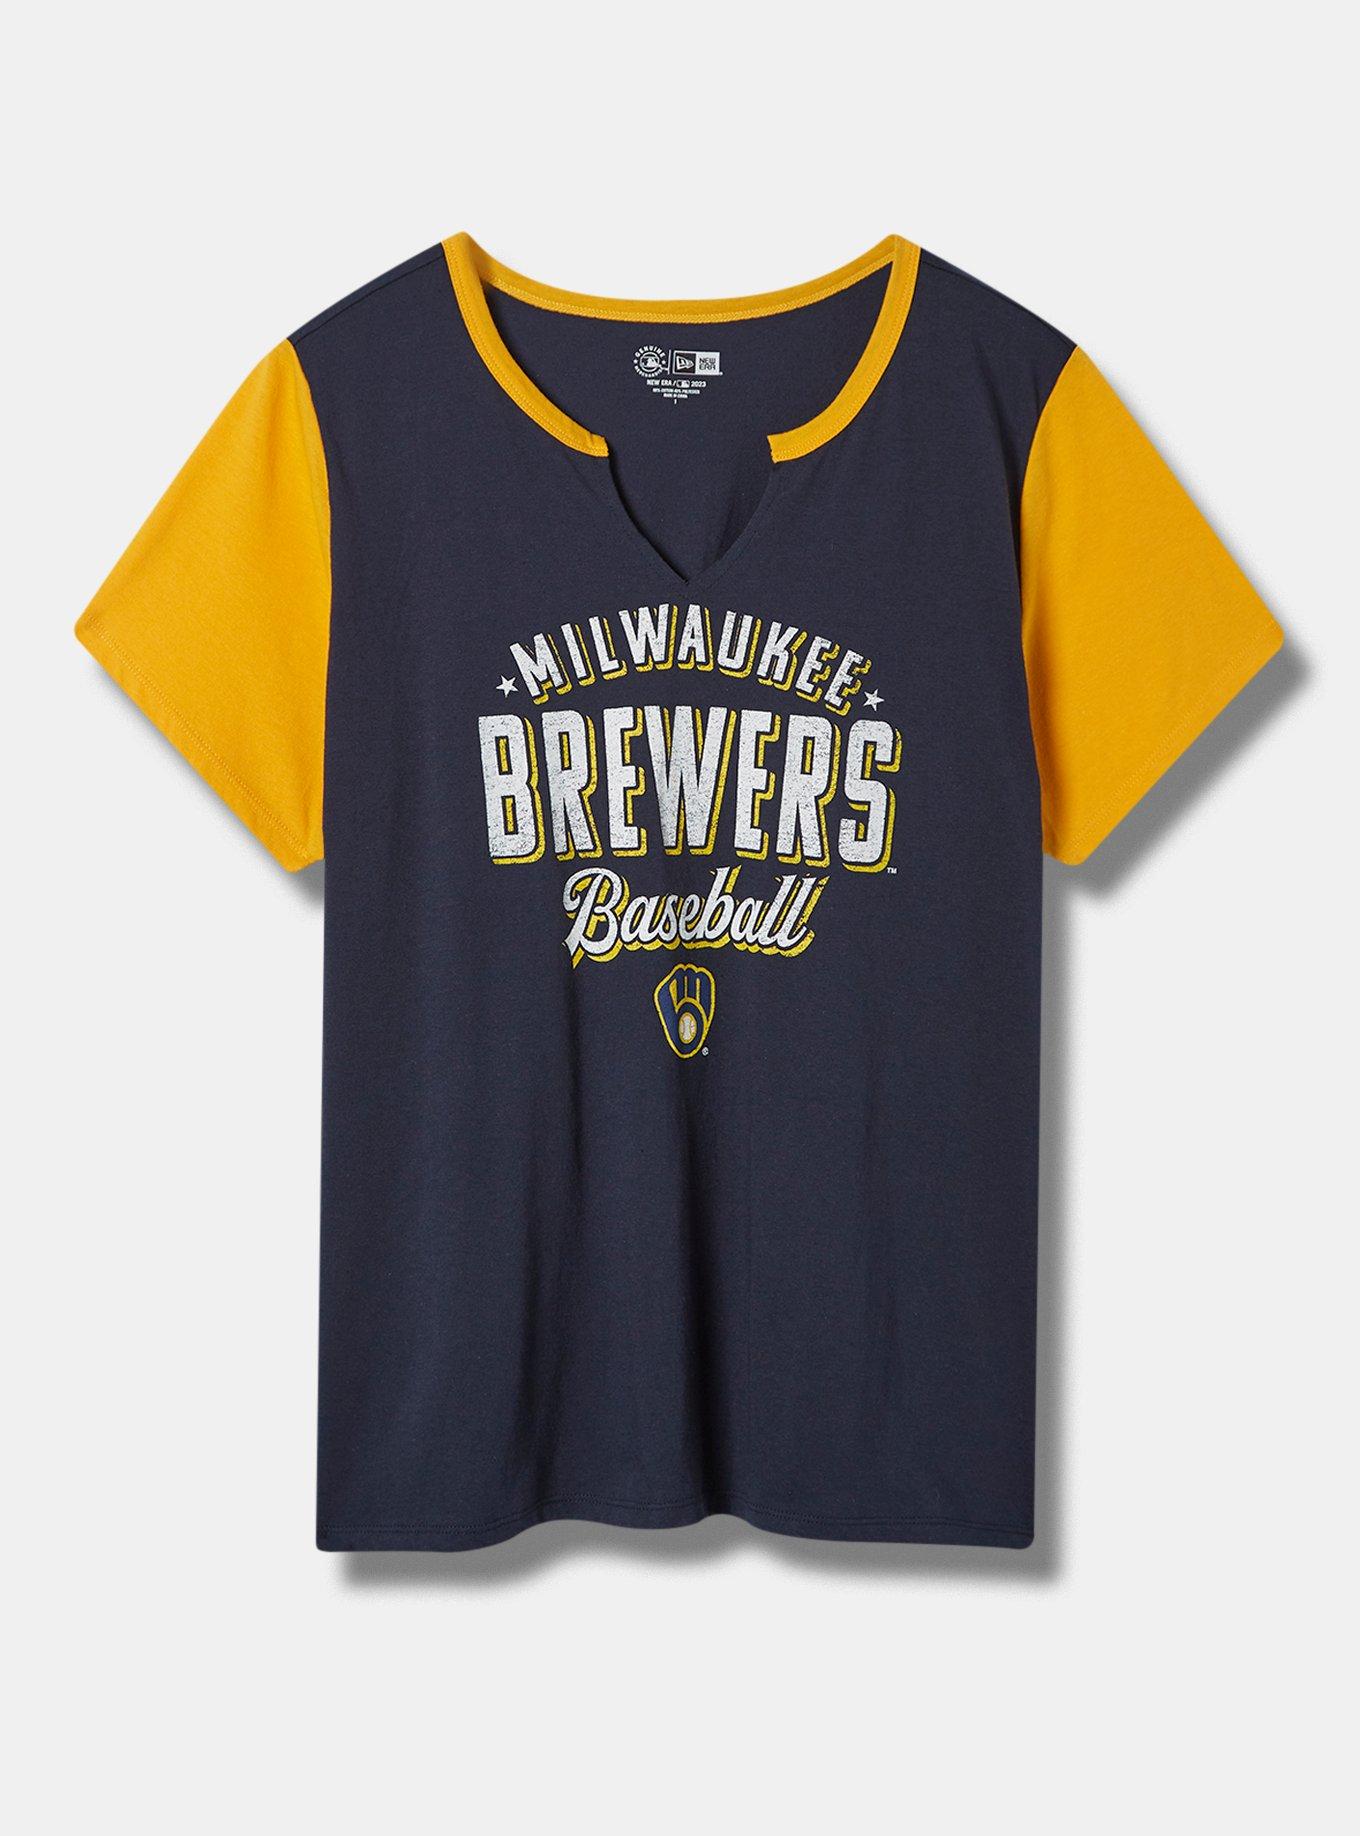 plus size brewers shirts